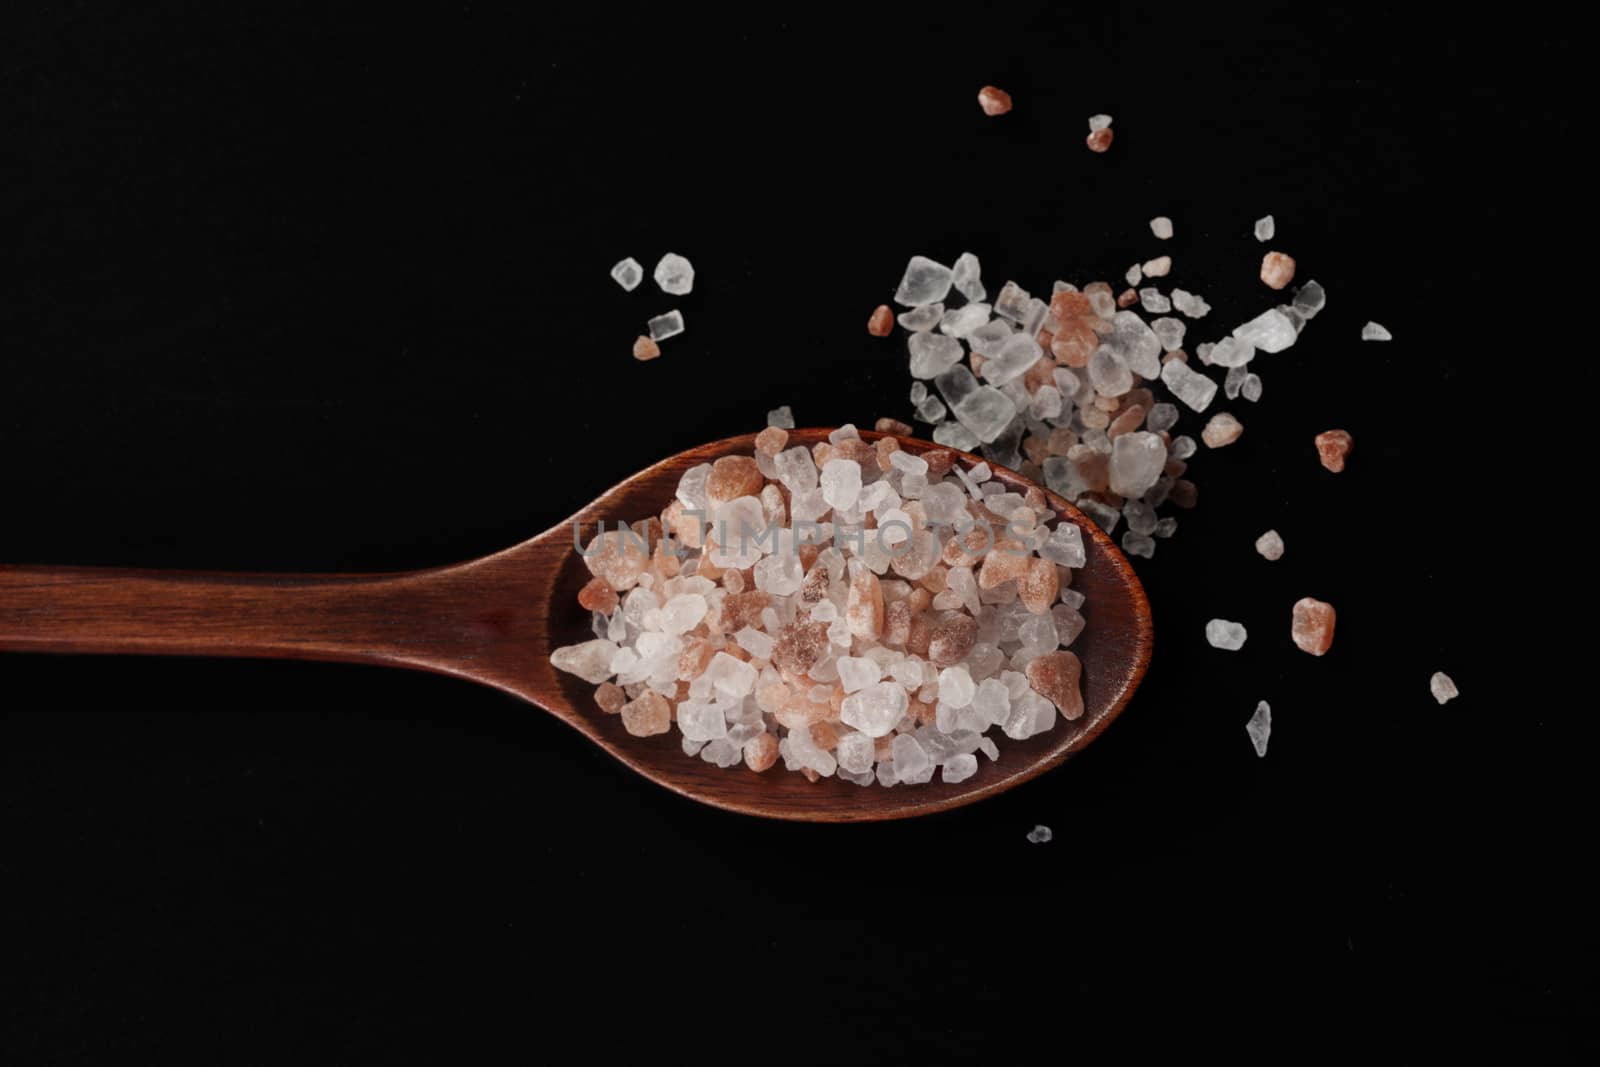 Rustic Wood Spoon With Himalayan Salt Raw Crystals on Dark Background